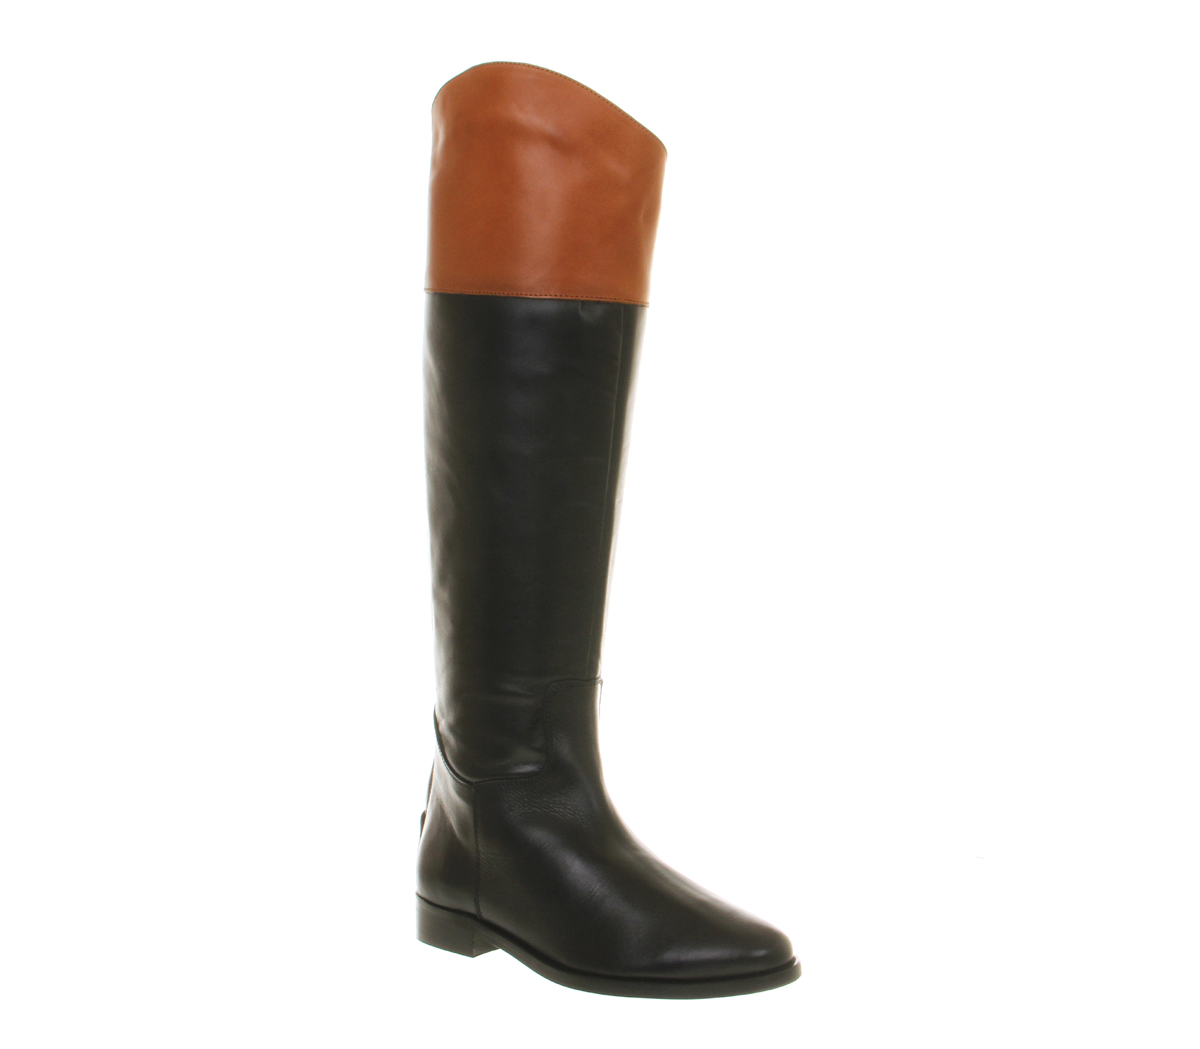 tan leather riding boots